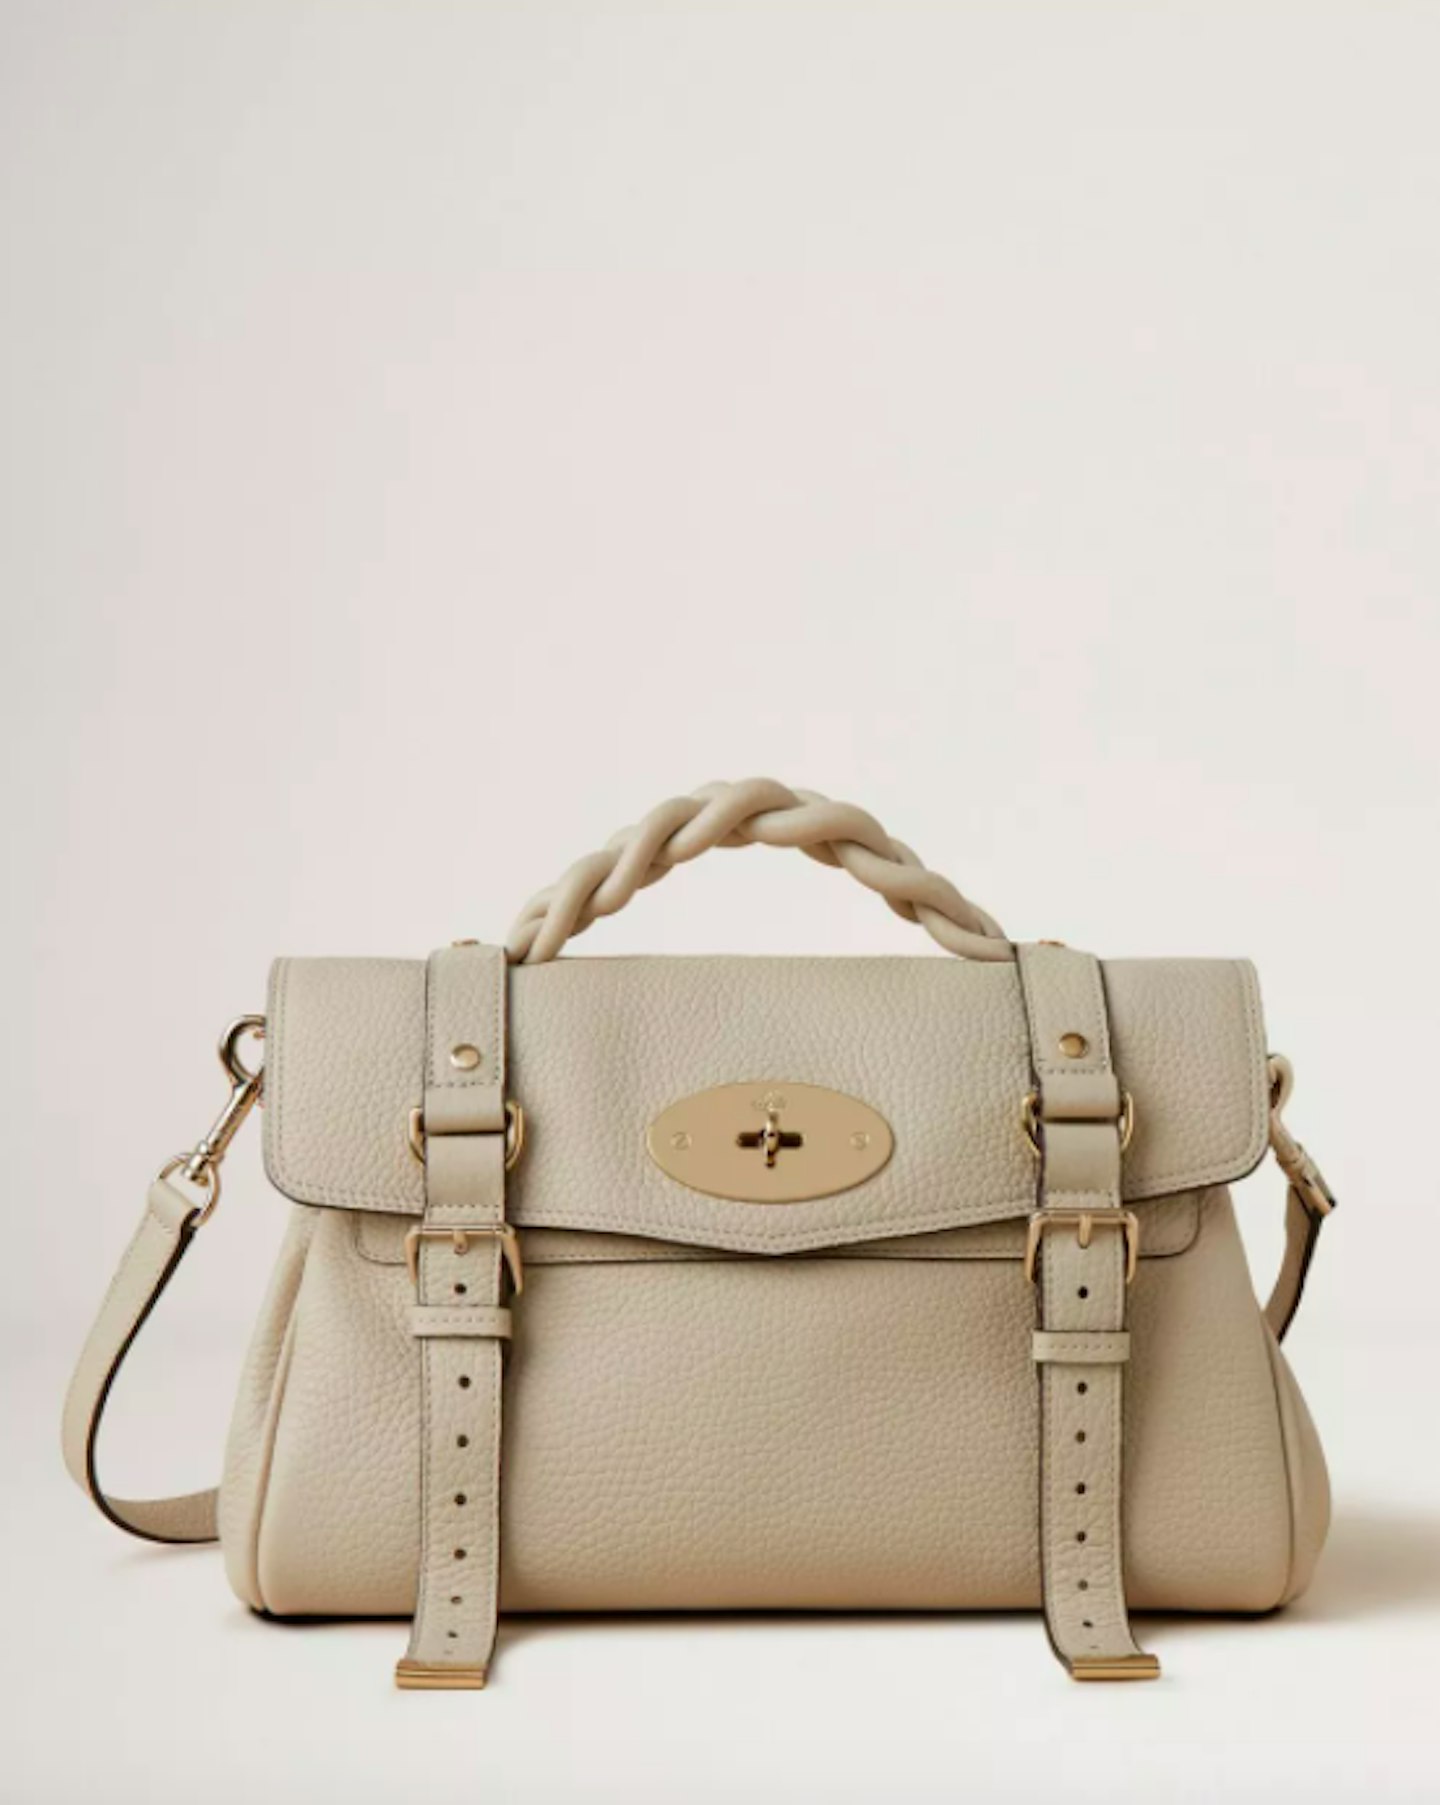 Calling All Noughties It-Girls: The Mulberry Alexa Bag Is Back